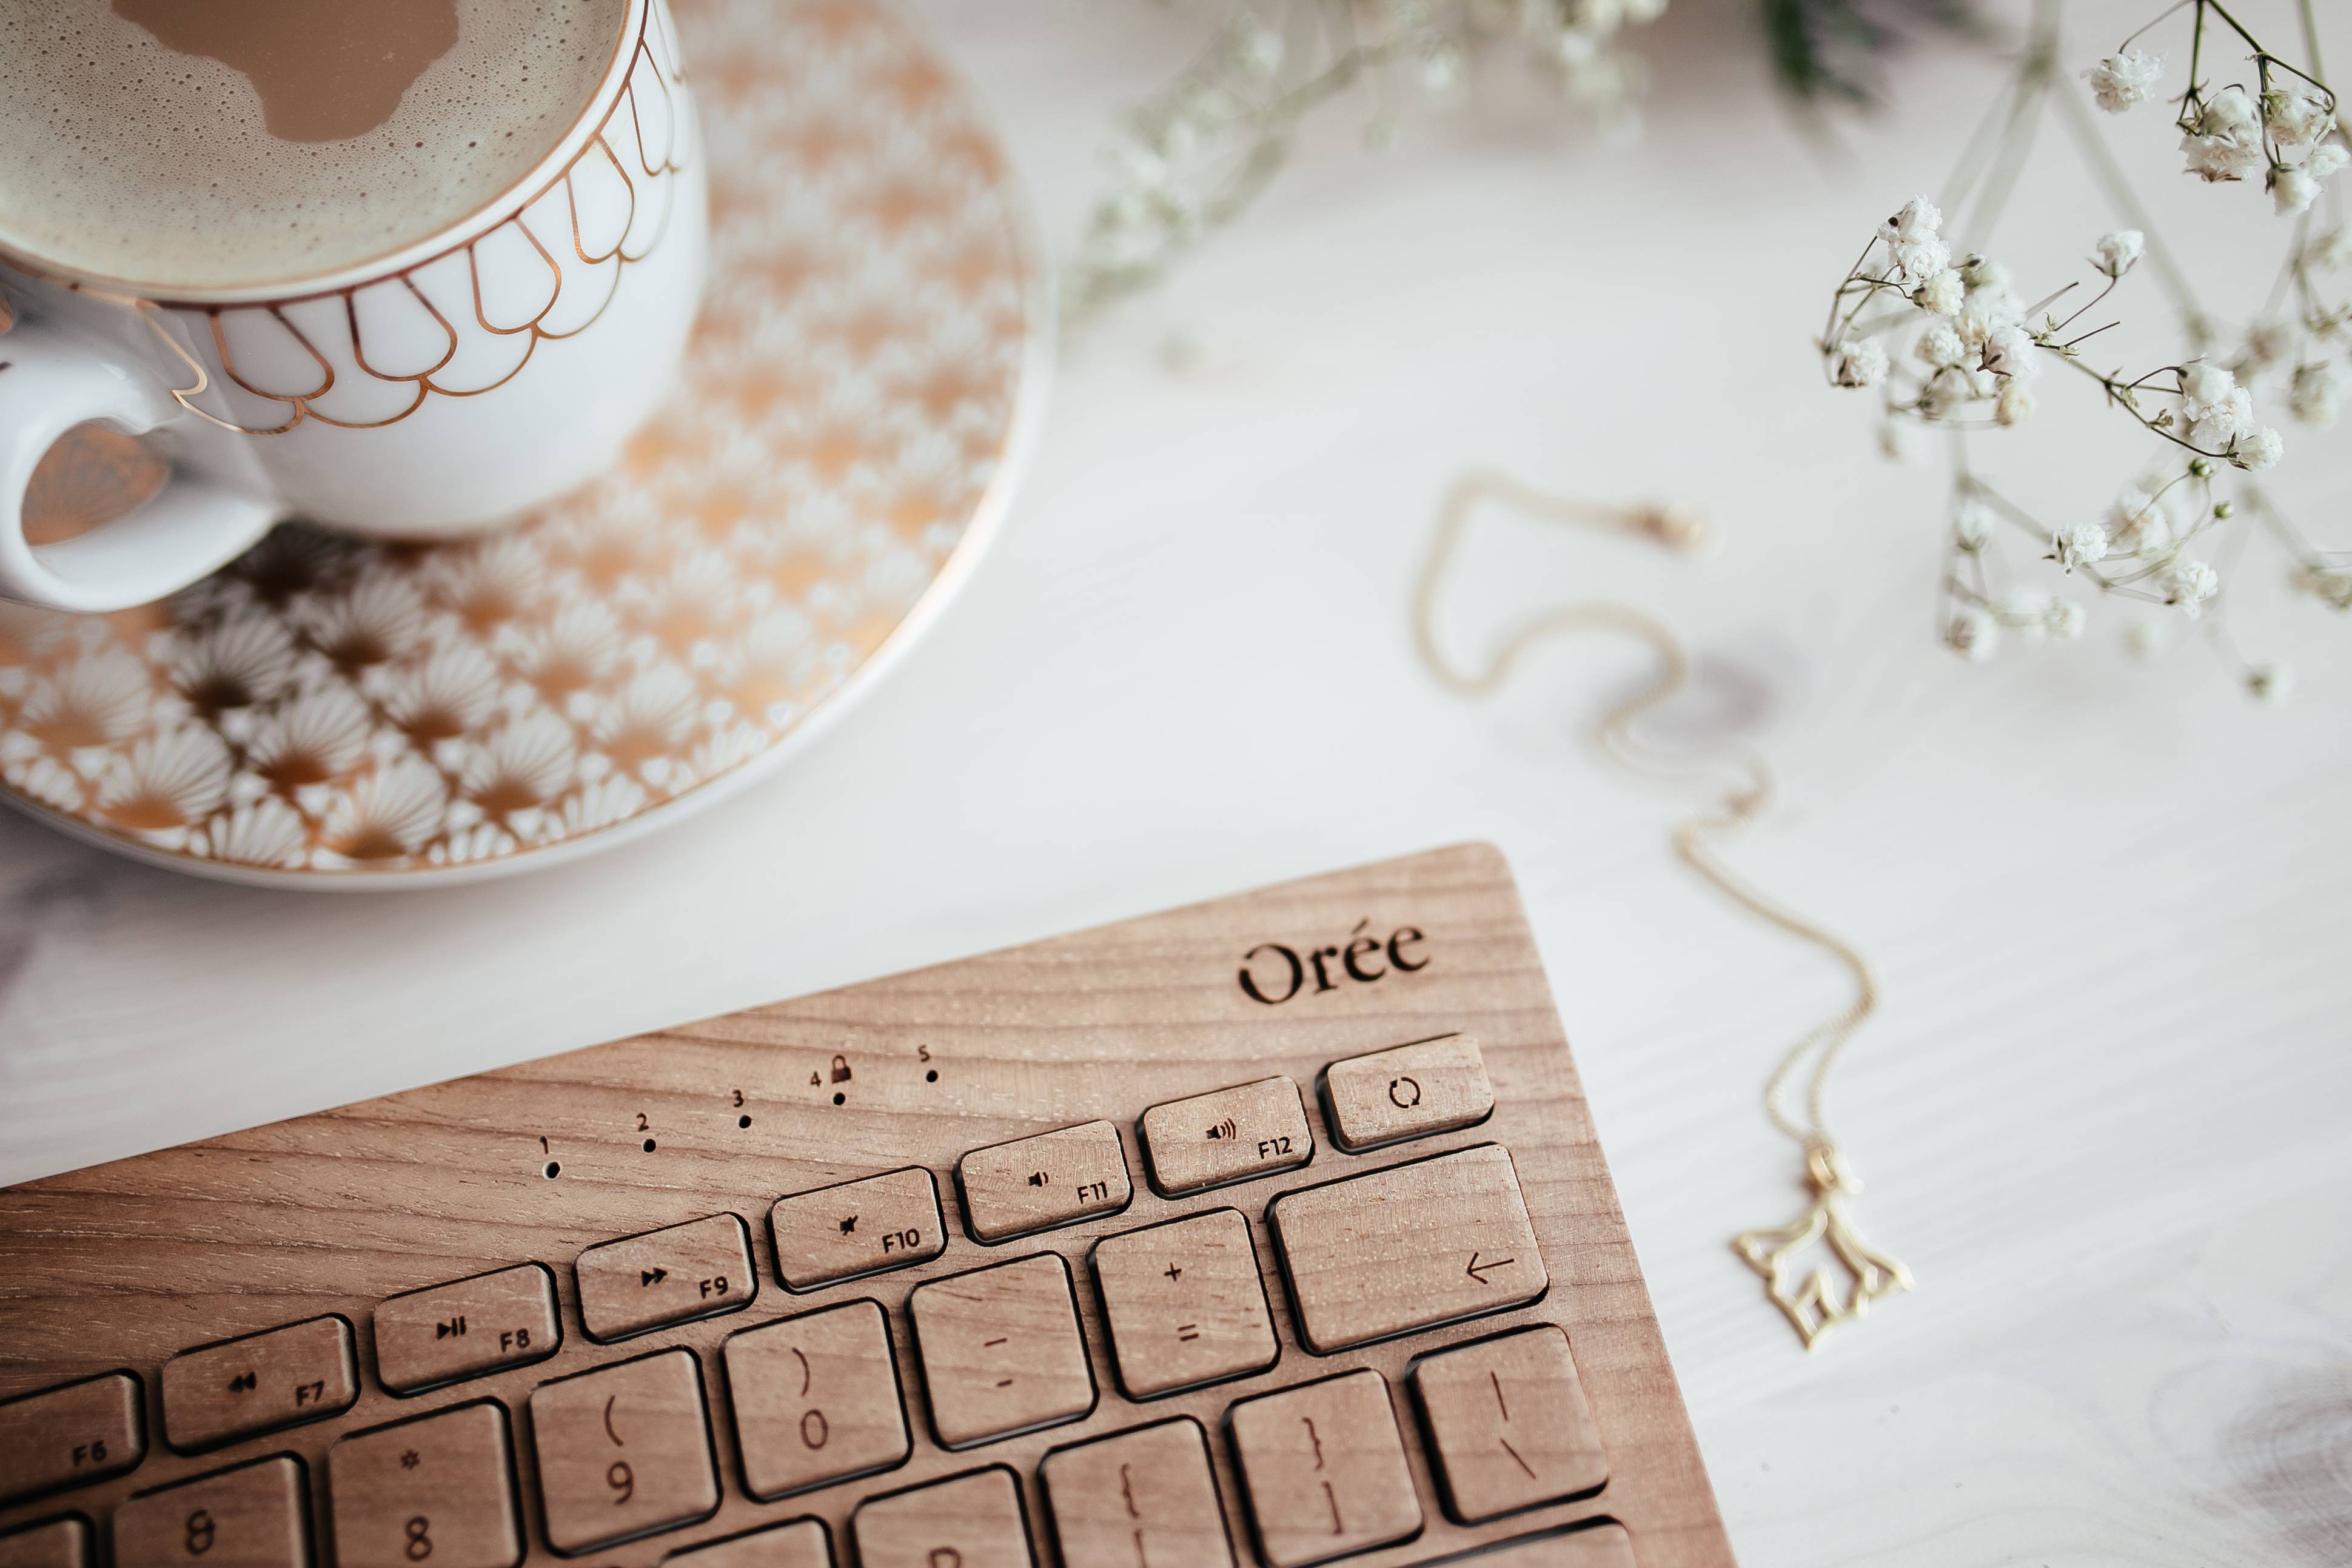 Wooden keyboard, coffee and golden jewellery